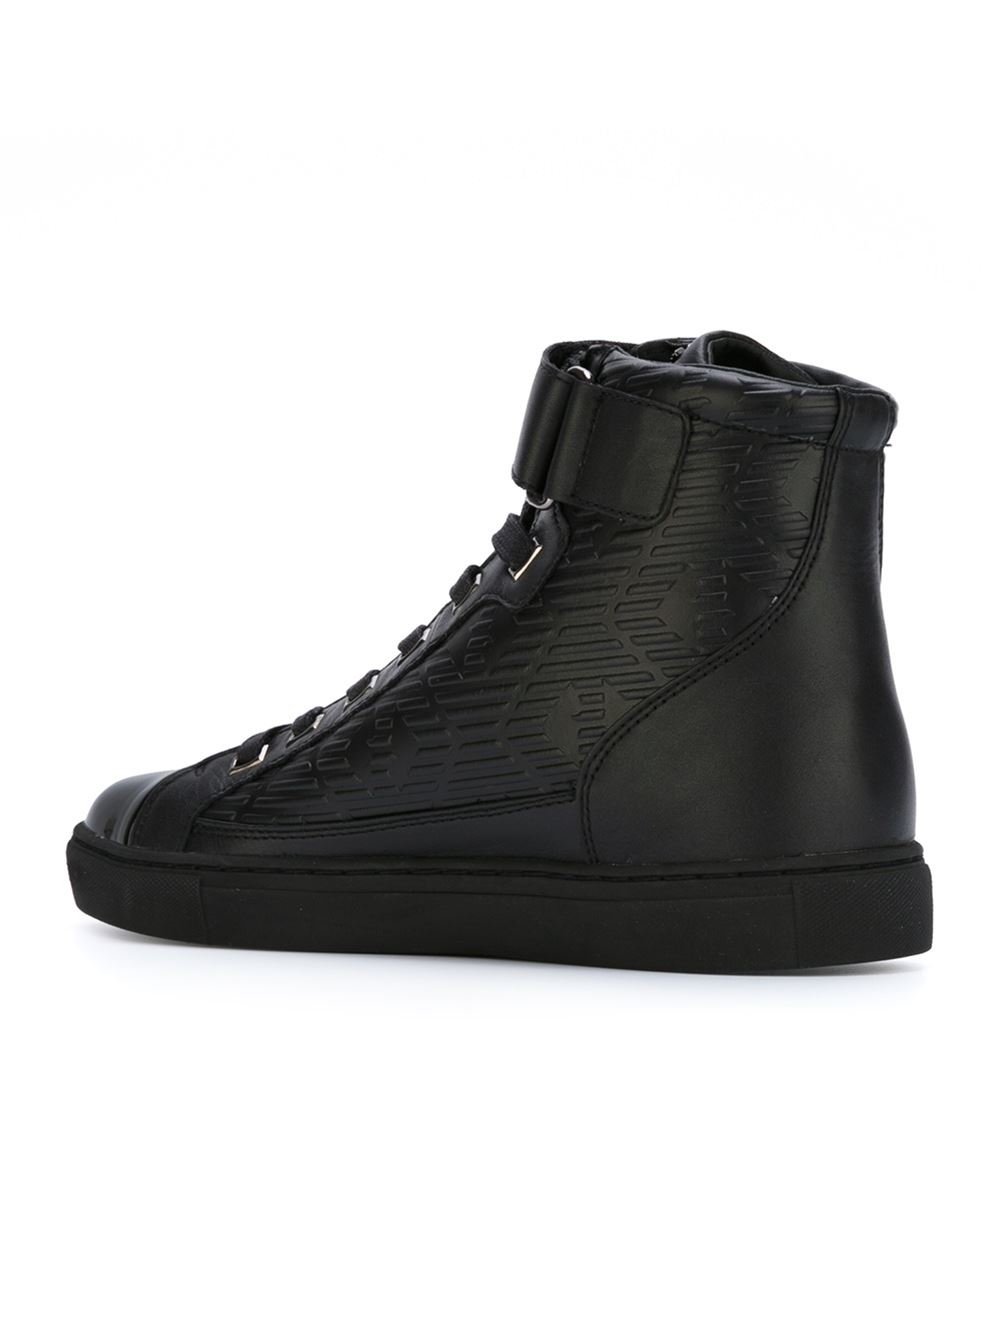 Caius Sprede Oberst Armani Jeans Leather High-Top Sneakers in Black for Men | Lyst